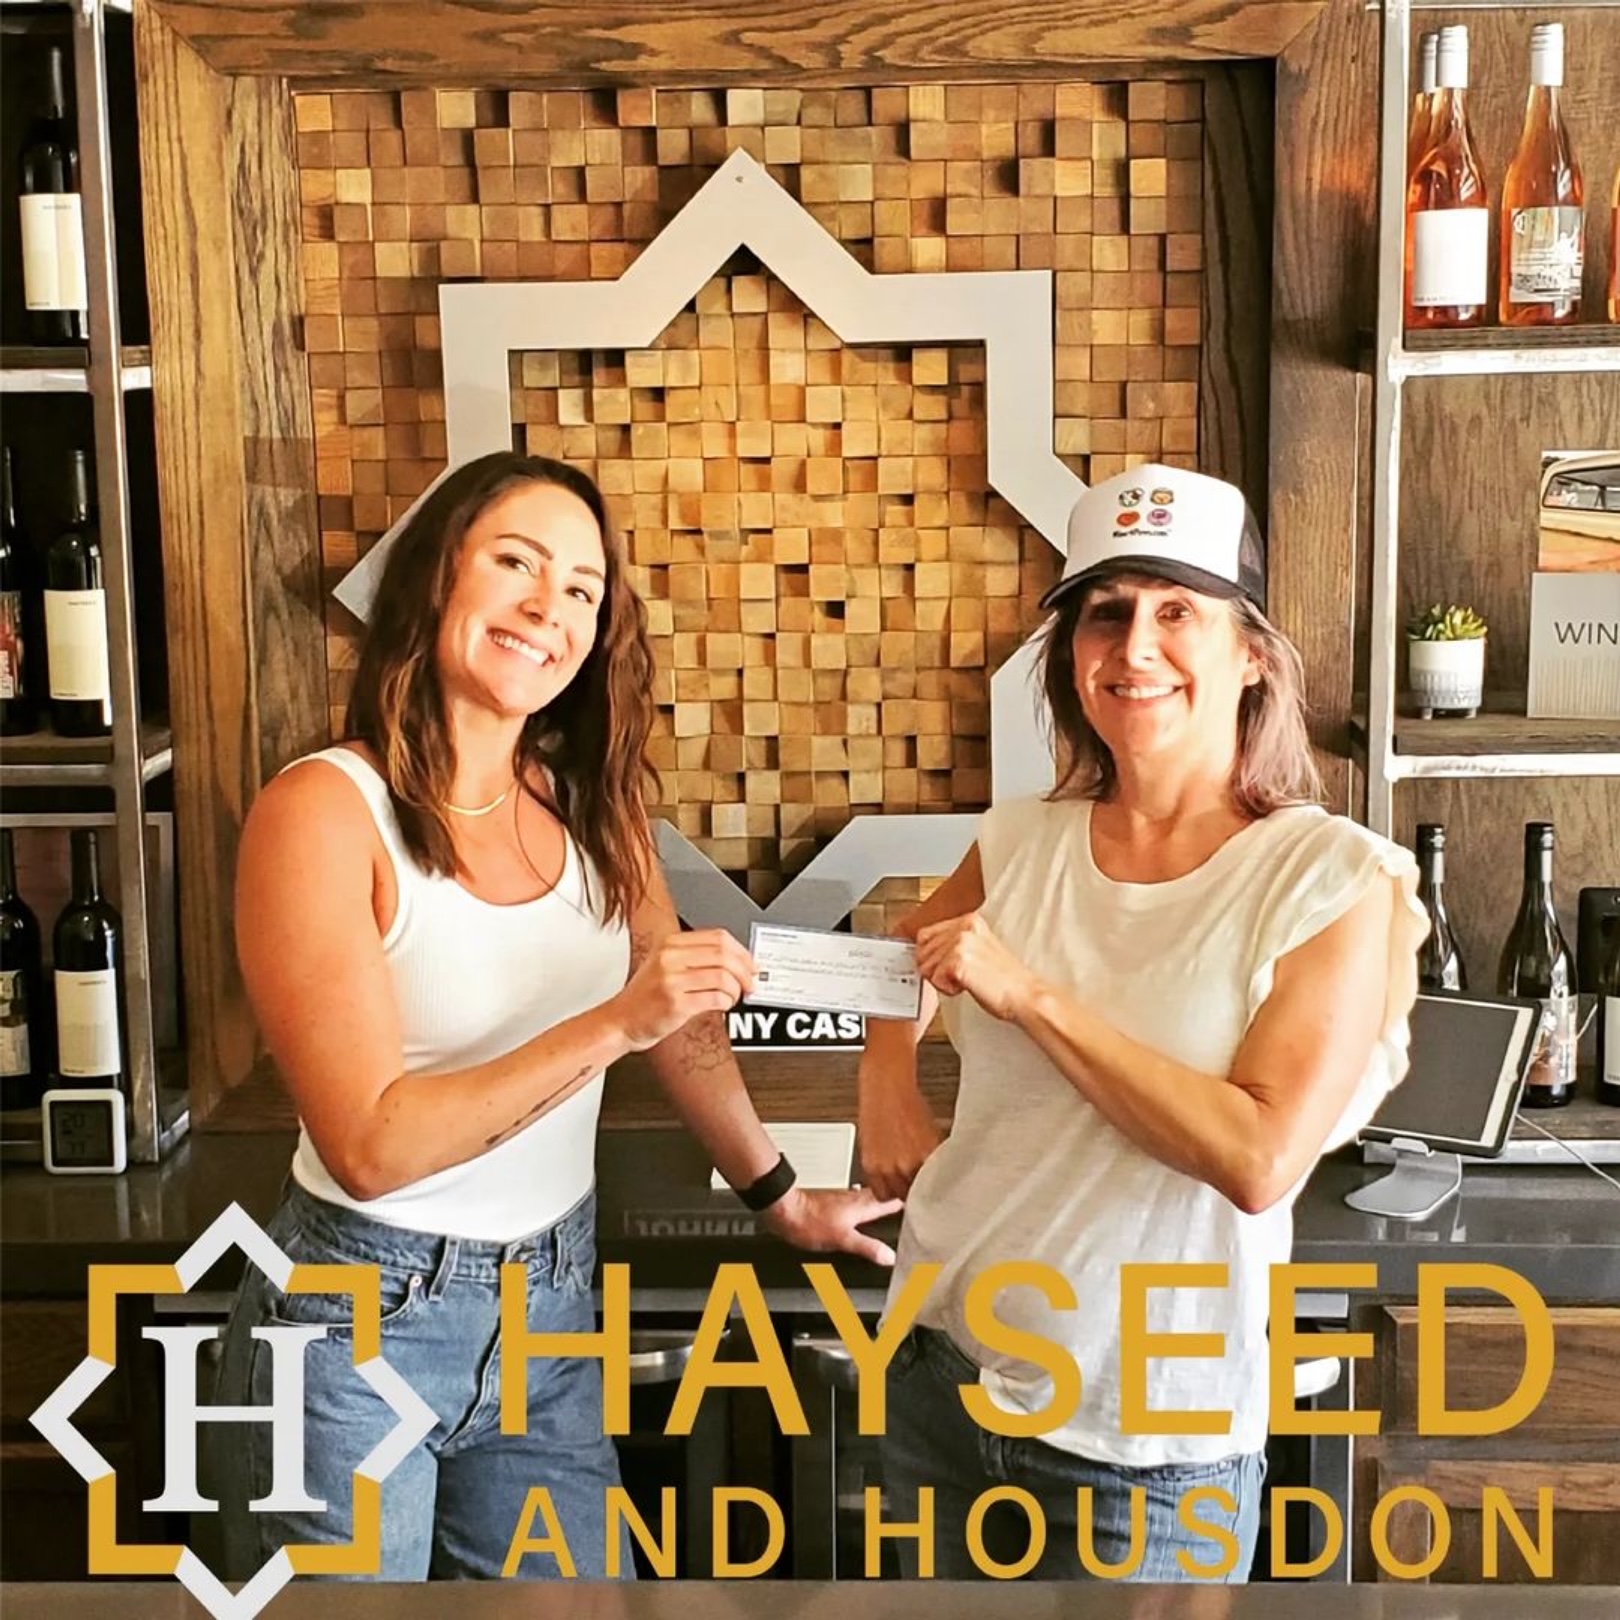 Two people toasting wine glasses in Hayseed & Housdon winery